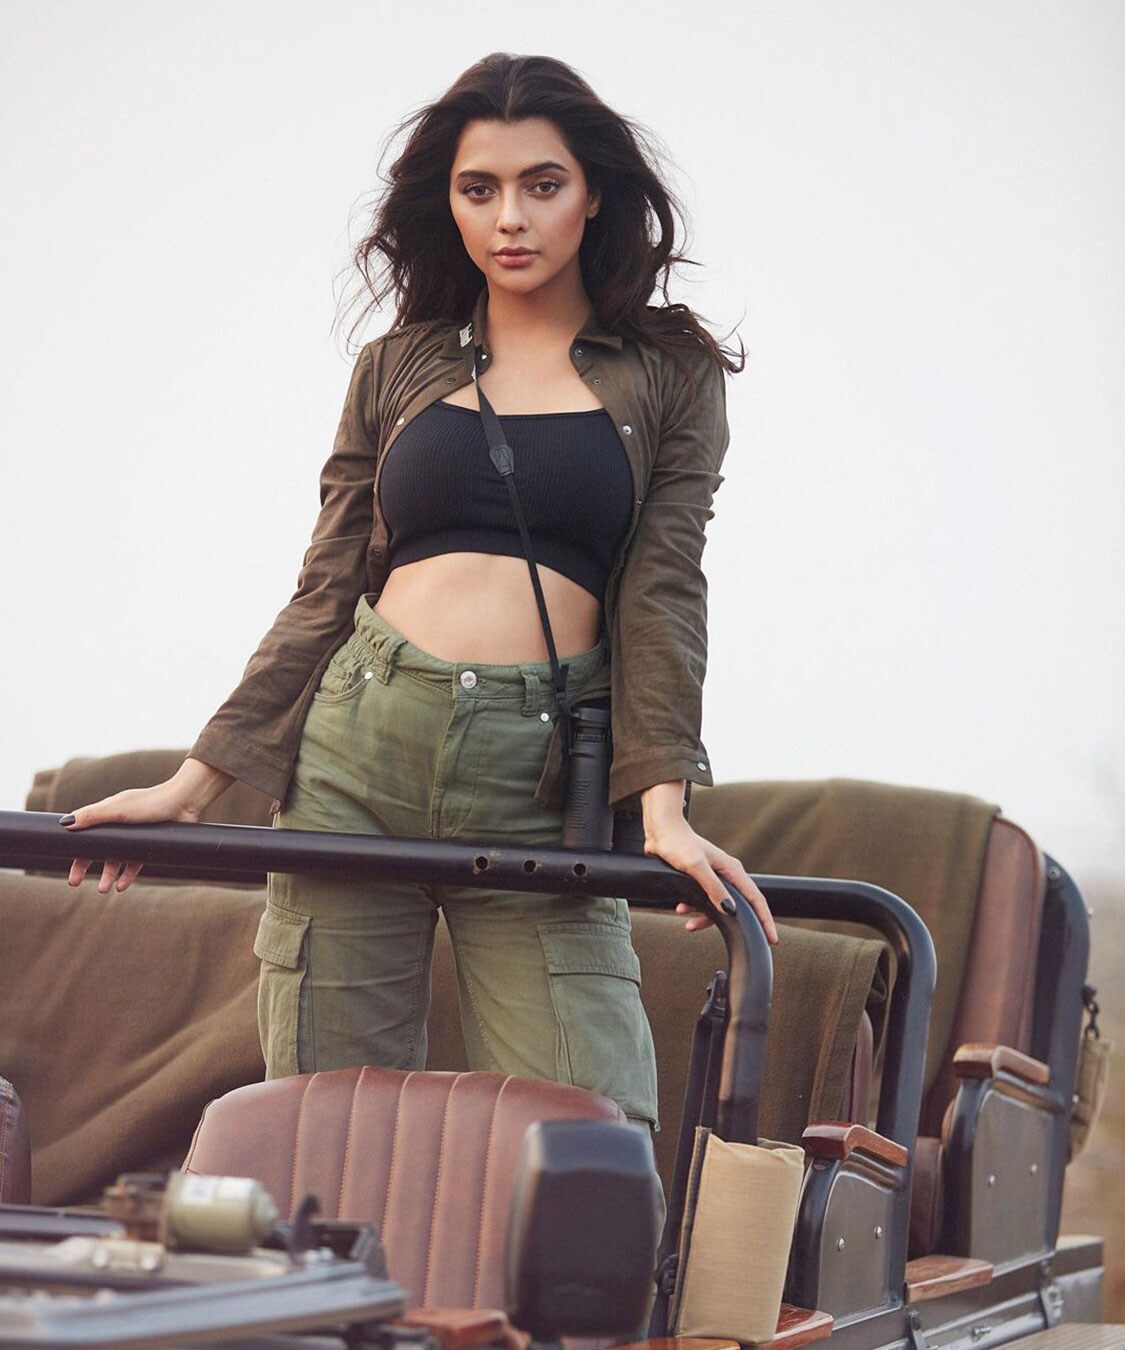 Ruhi Singh Exudes Fearless Spirit and Beauty in Captivating Photoshoot